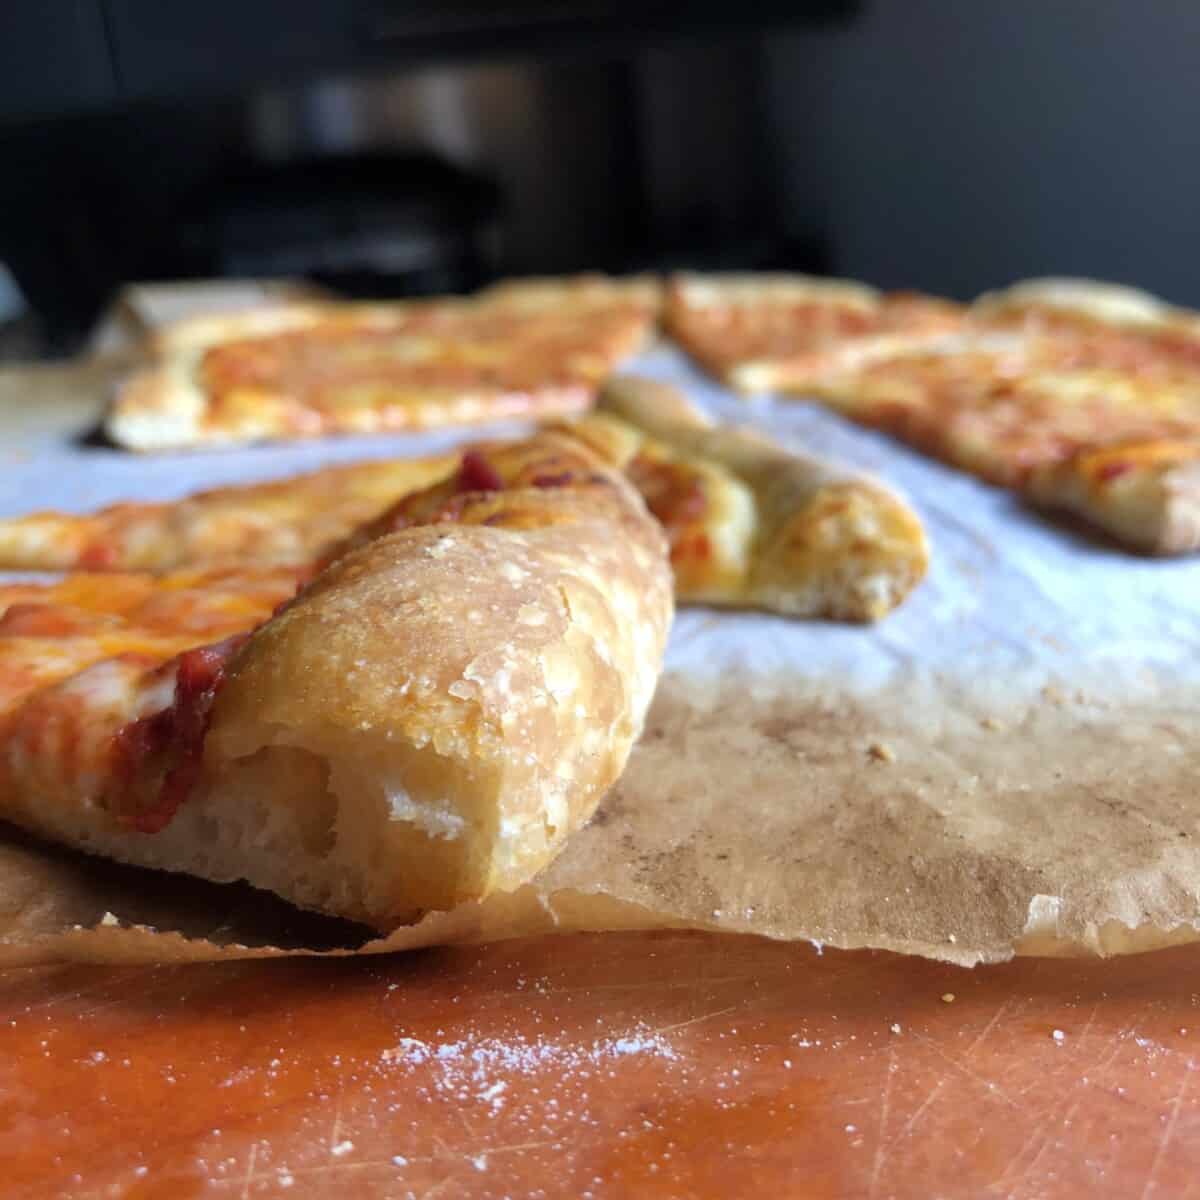 View of pizza crust from the side.